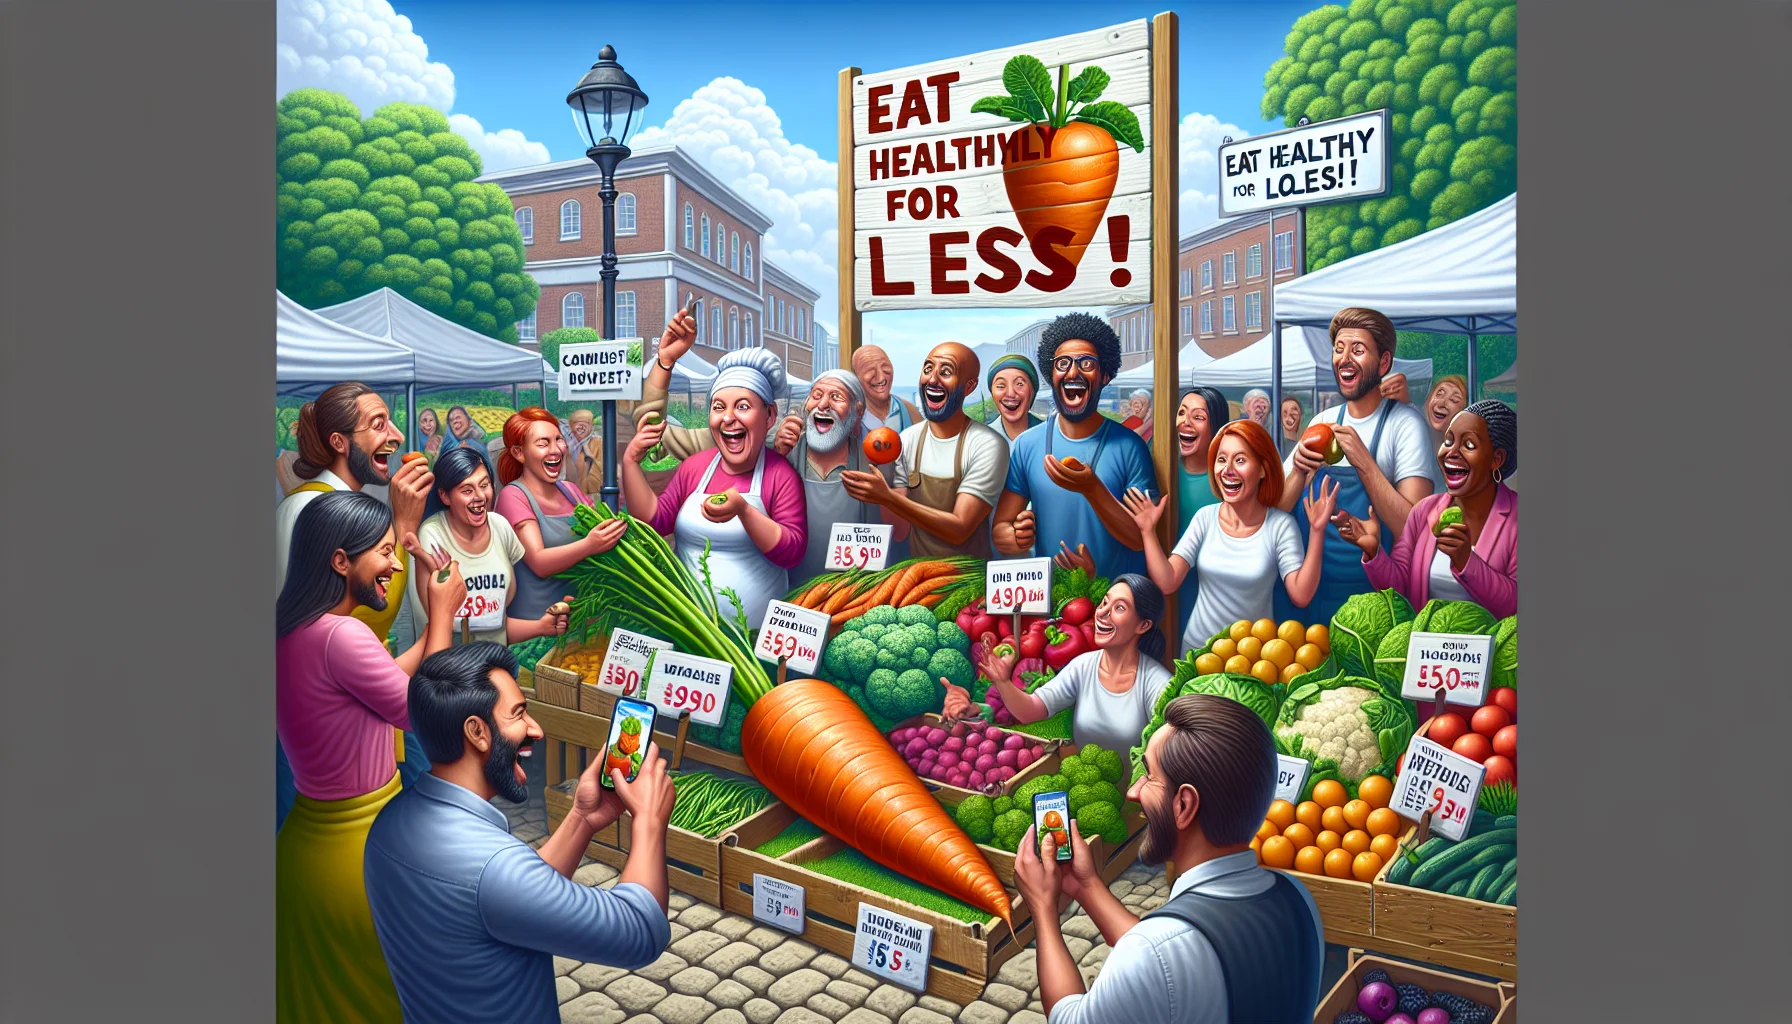 Create a humorous, realistic image capturing the spirit of Commitment to Local and Fresh Eating. There is a vibrant farmer's market bustling with people of various descents such as Caucasian, Hispanic, Black, Middle-Eastern, South Asian all interacting and cheerful. They are amazed to discover the low prices of the colourful and fresh fruits and vegetables. Incorporate elements such as vendors happily distributing samples of their products to smiling customers, a signpost depicting 'Eat Healthily For Less!', and perhaps showcasing individuals joyously discovering a giant-sized carrot or apple with a price tag showing a surprisingly low price.